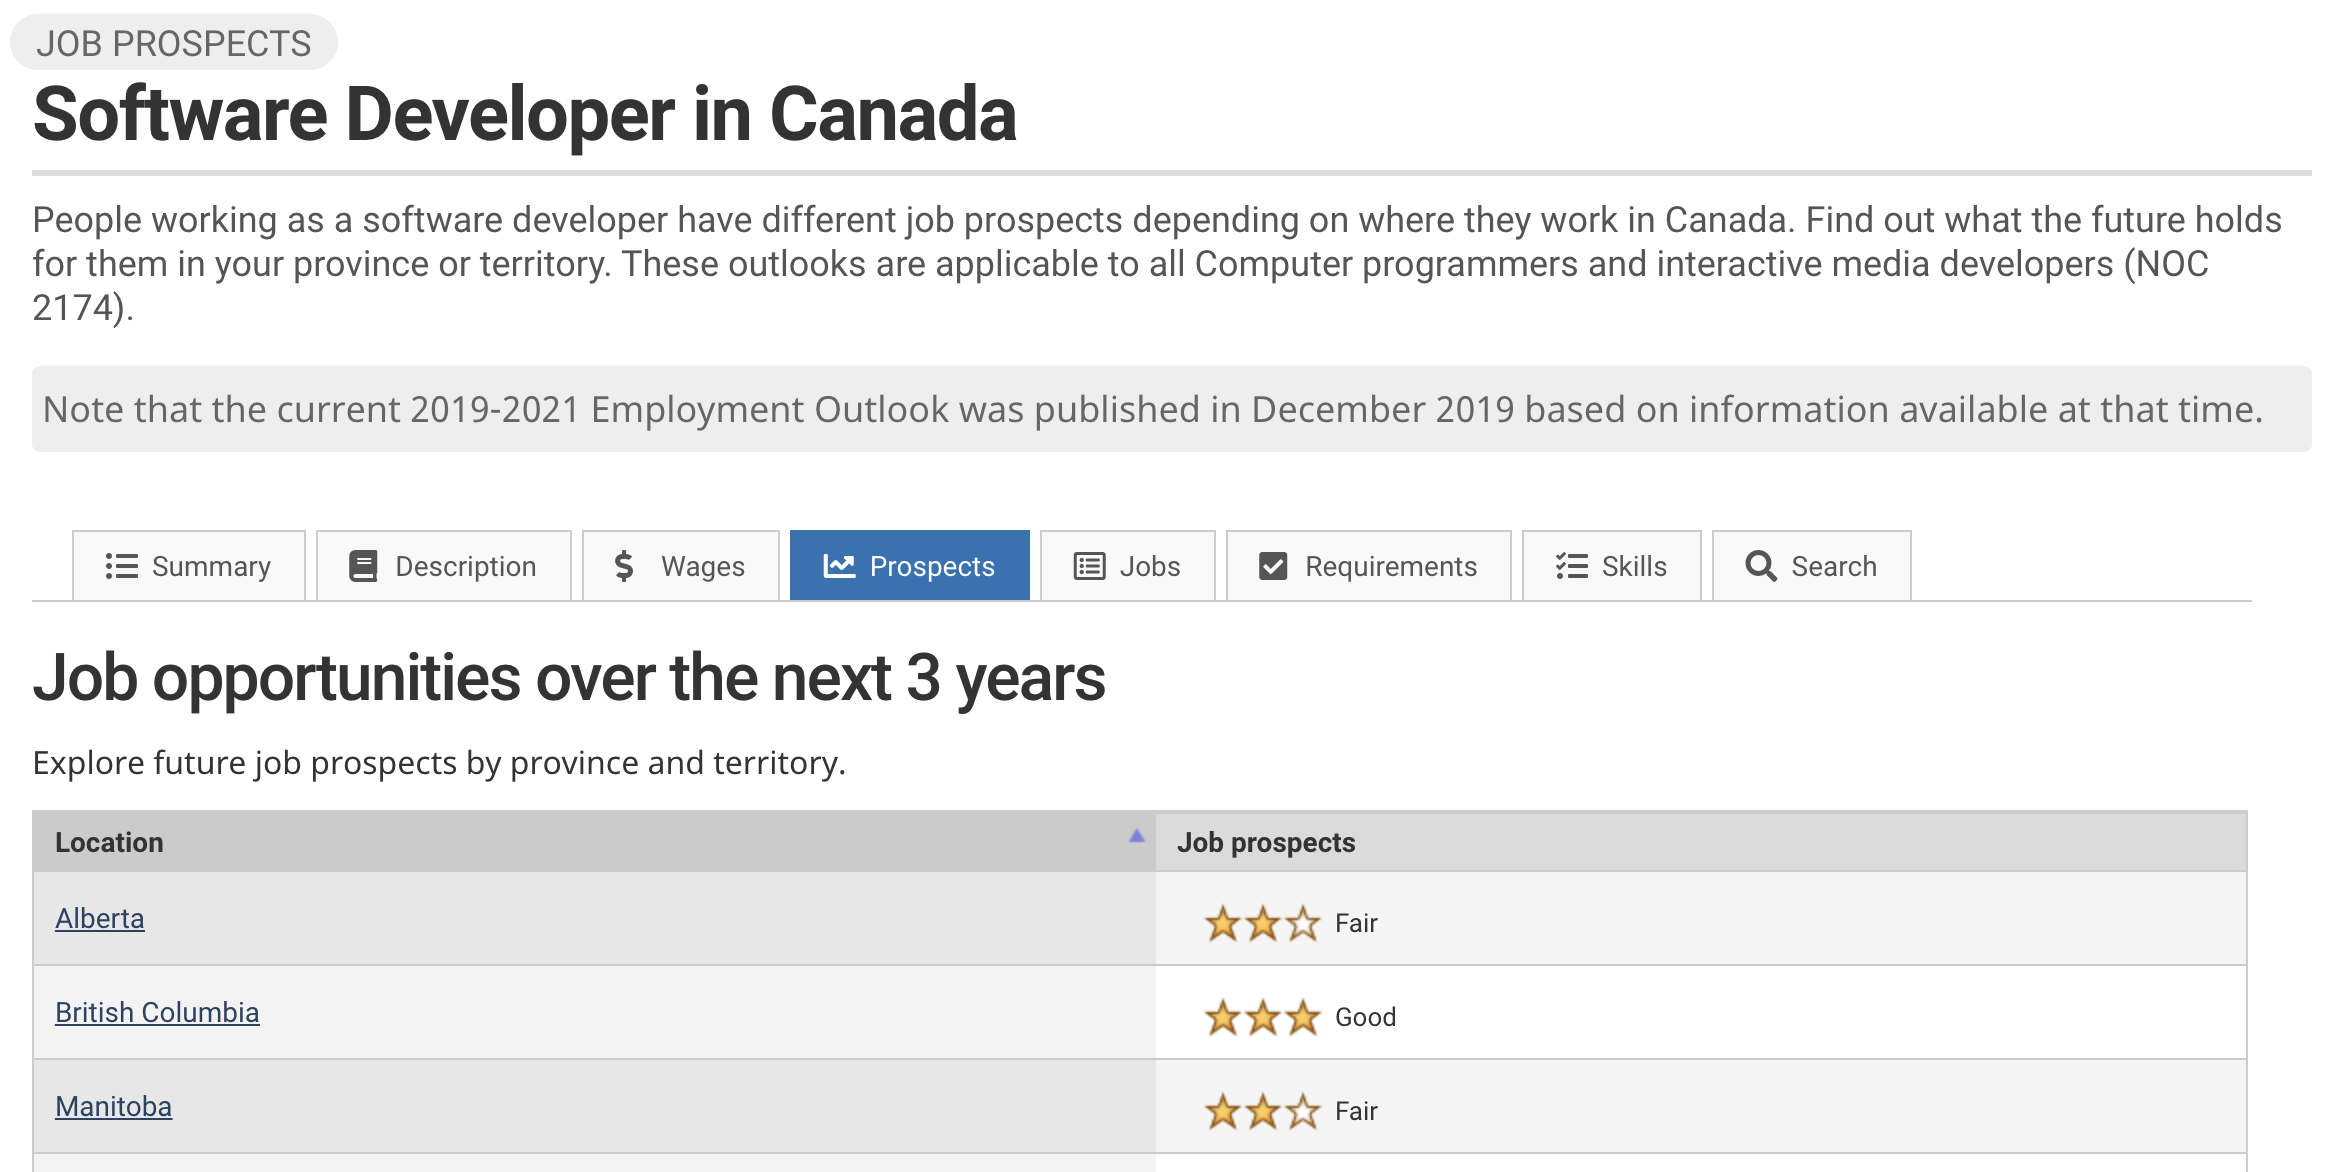 Image showing StatCan job prospects and trends for a Software Developer in Canada